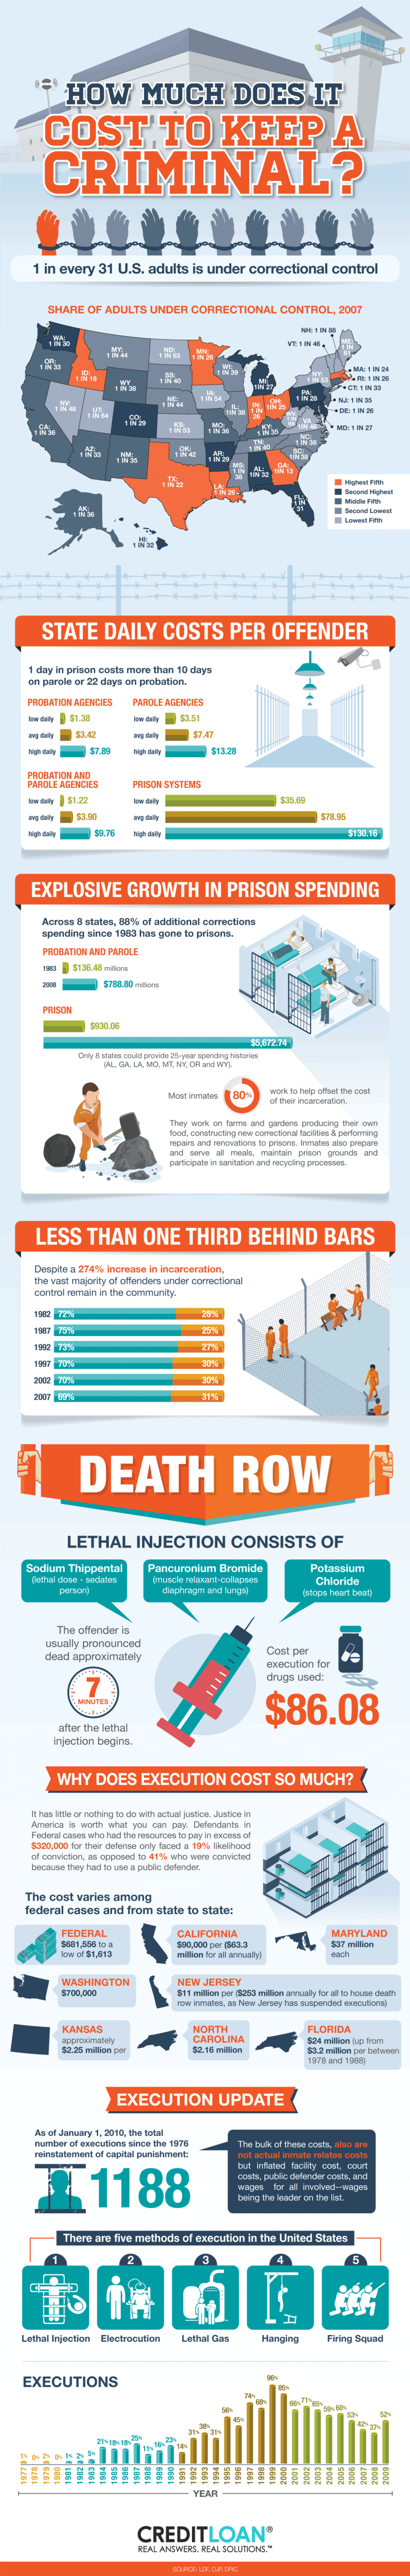 how much money does it cost to keep criminals incarcerated